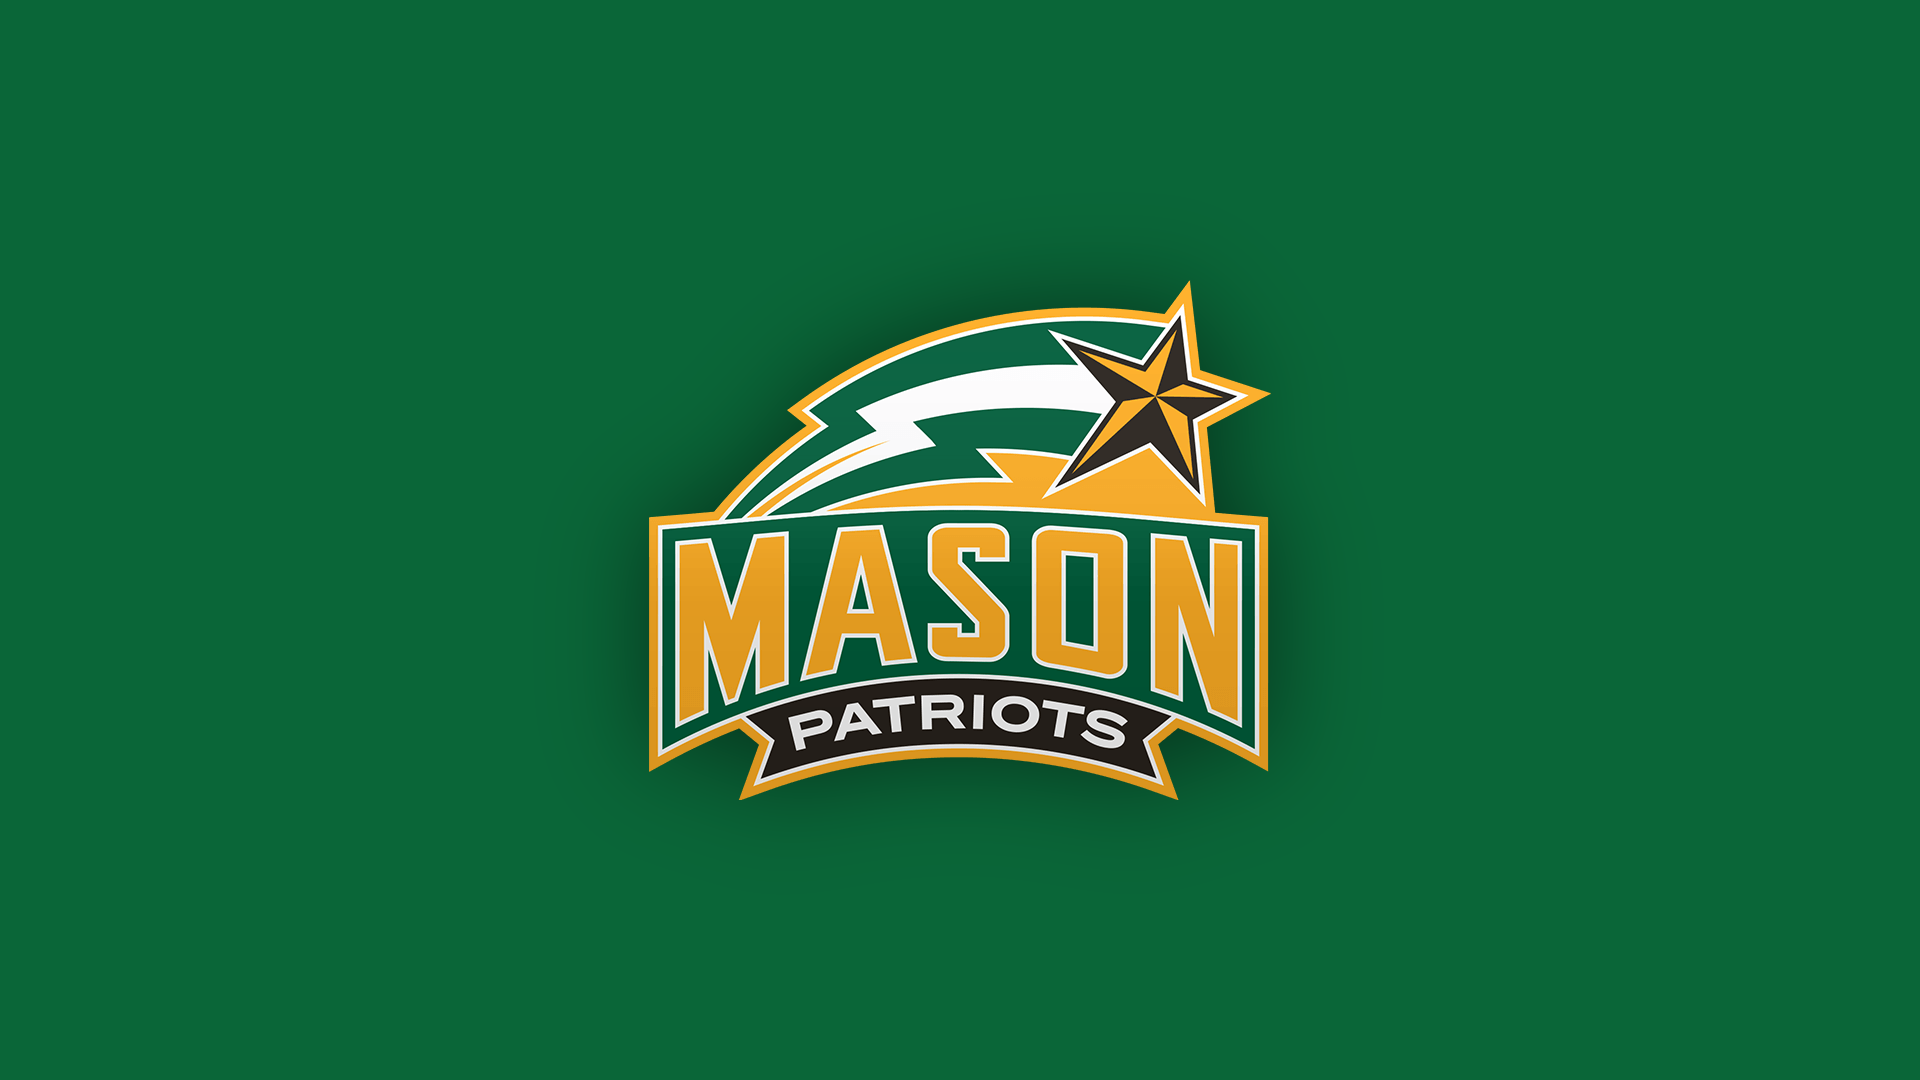 How to Watch The Mason Patriots Live Without Cable in 20192020 The Streamable